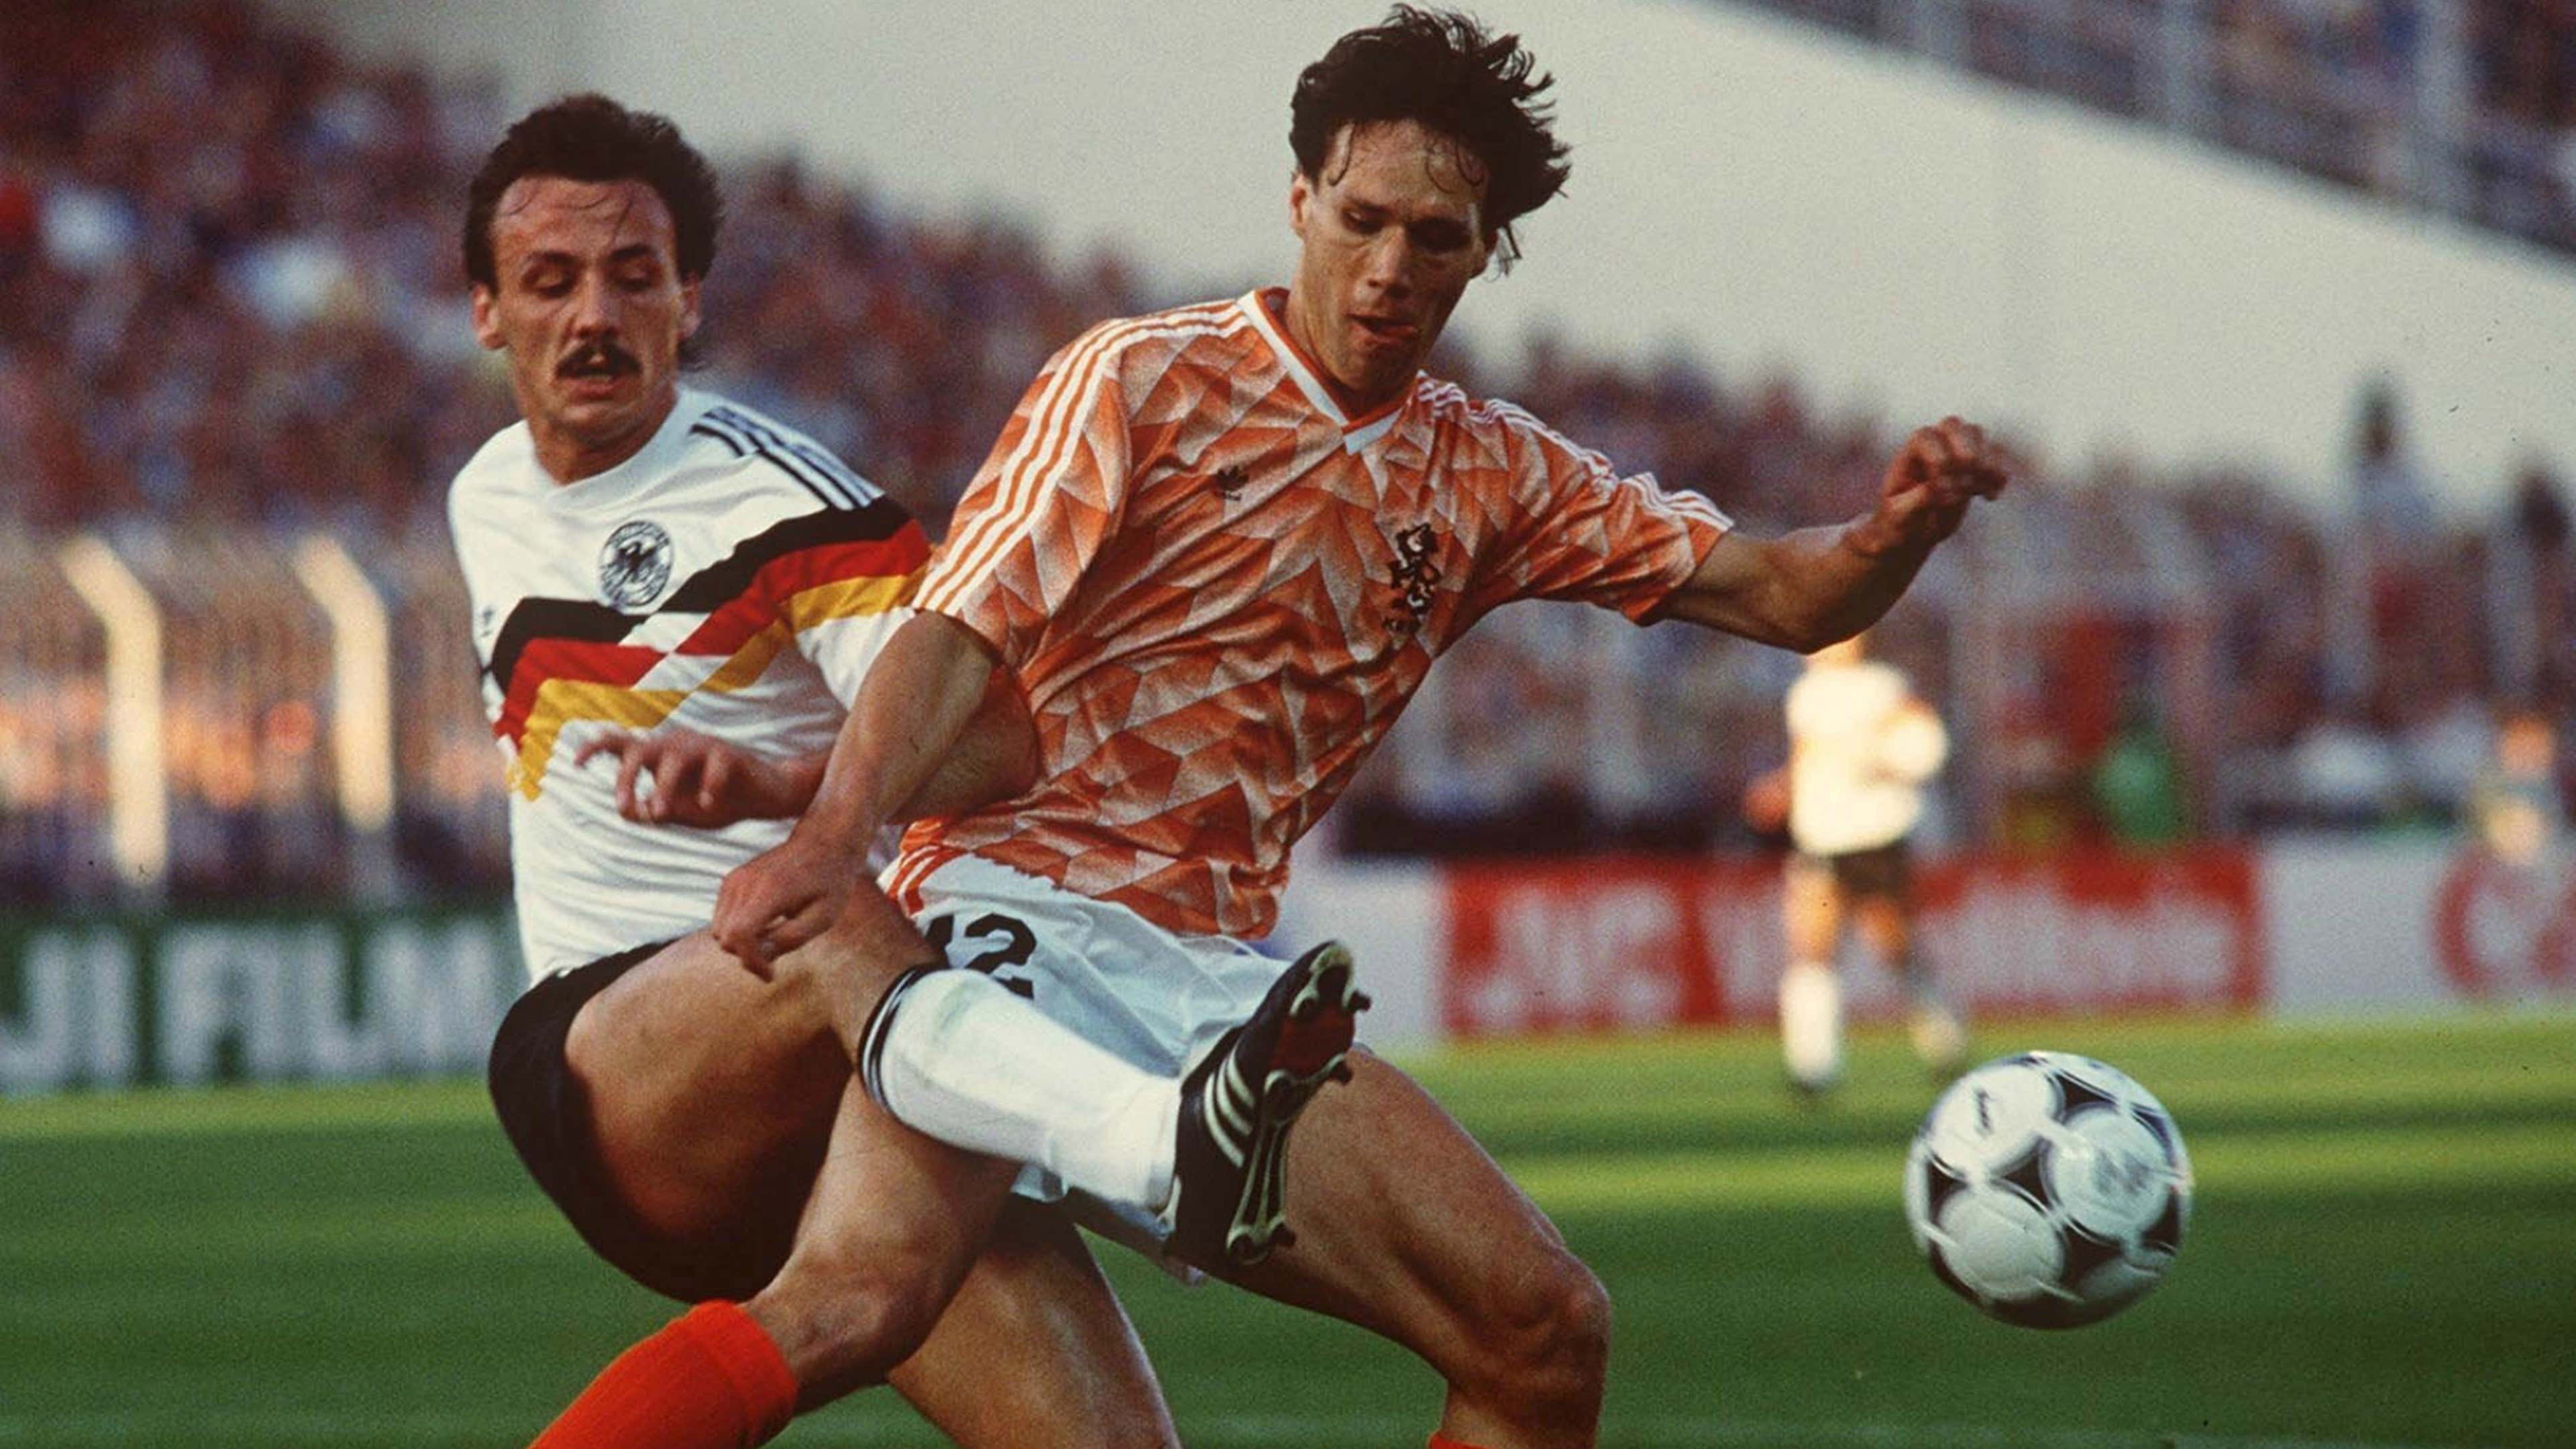 West Germany 1990 World Cup squad - Who were the players and where